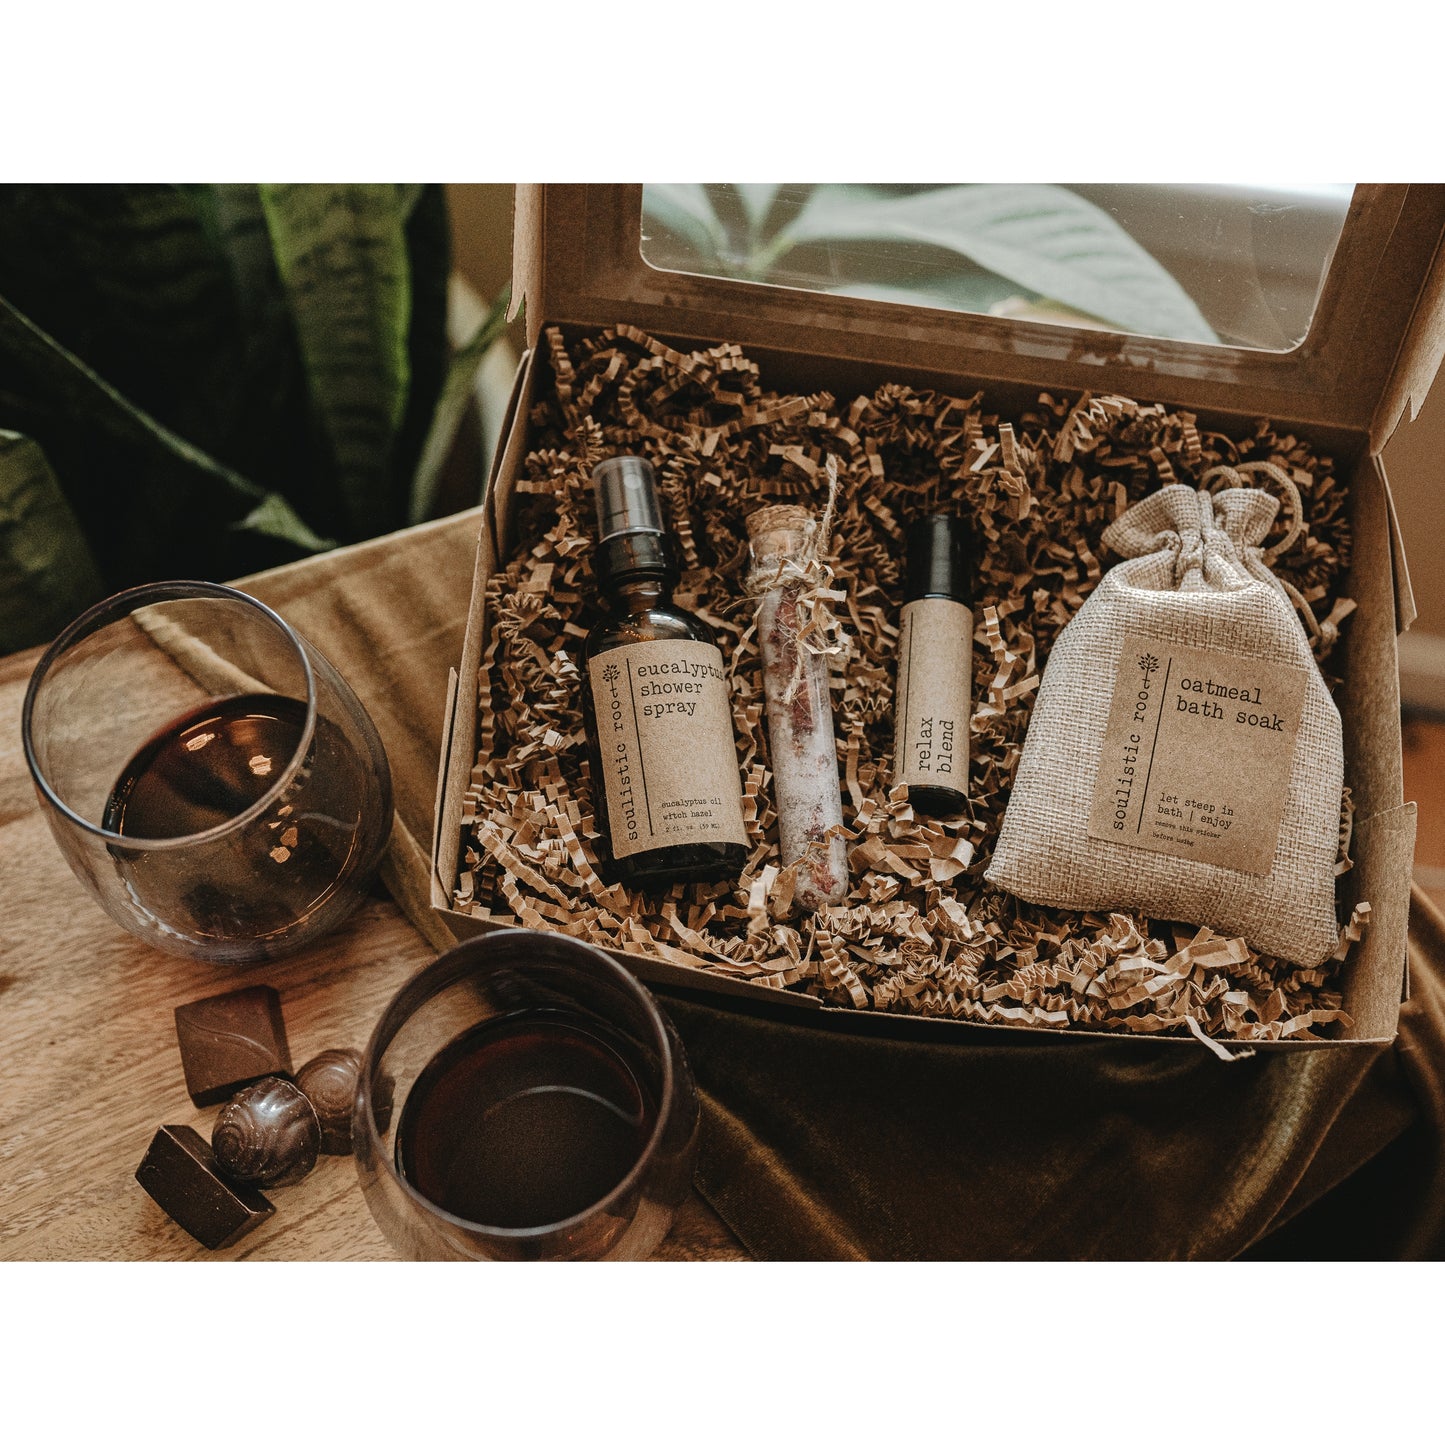 Spa Day Gift Set | Relaxing Bath Gift Set